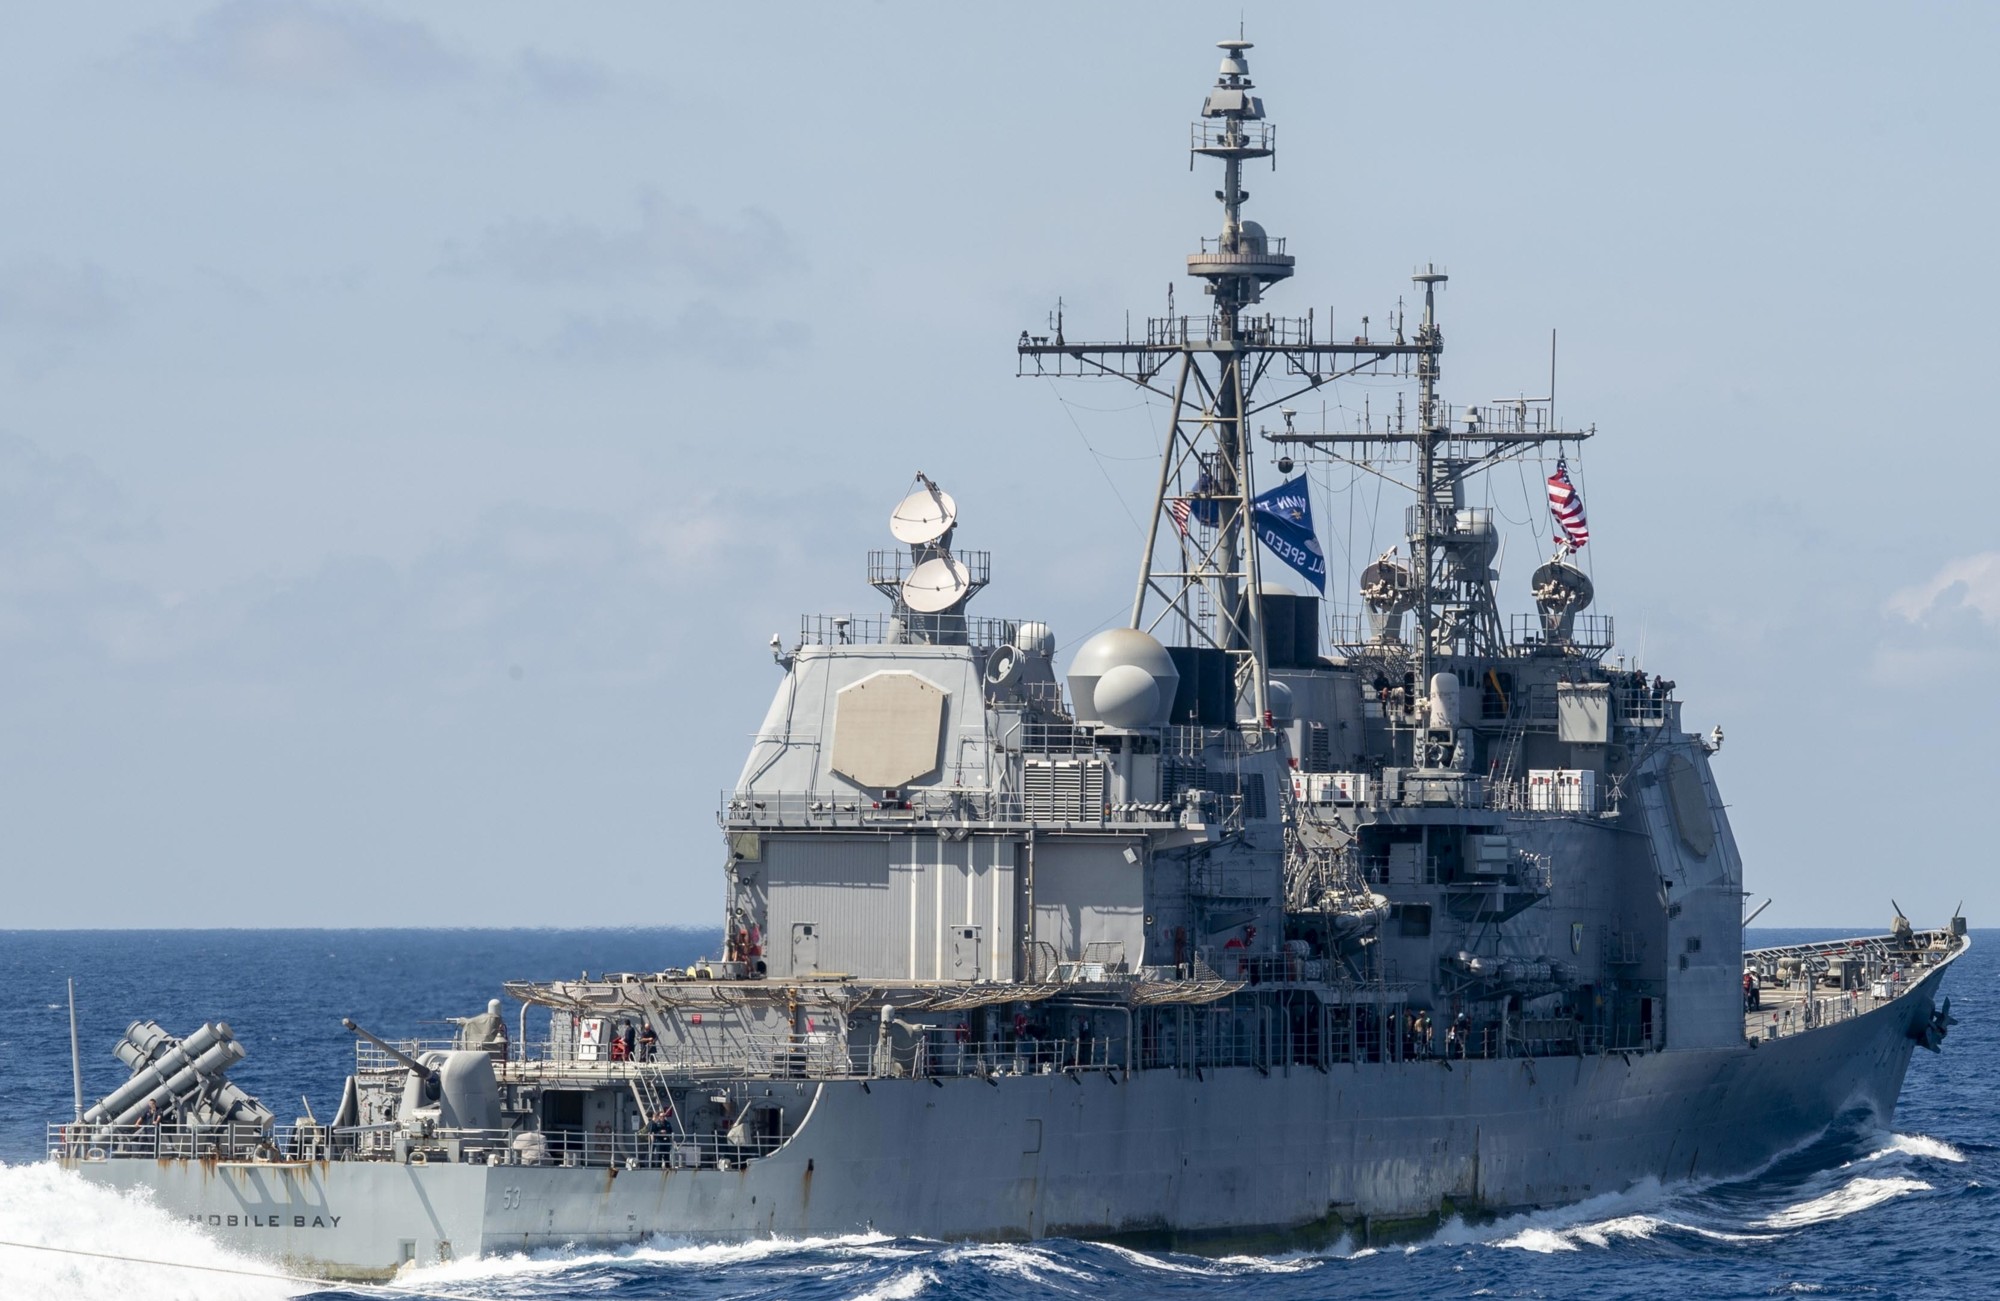 cg-53 uss mobile bay ticonderoga class guided missile cruiser aegis us navy 124